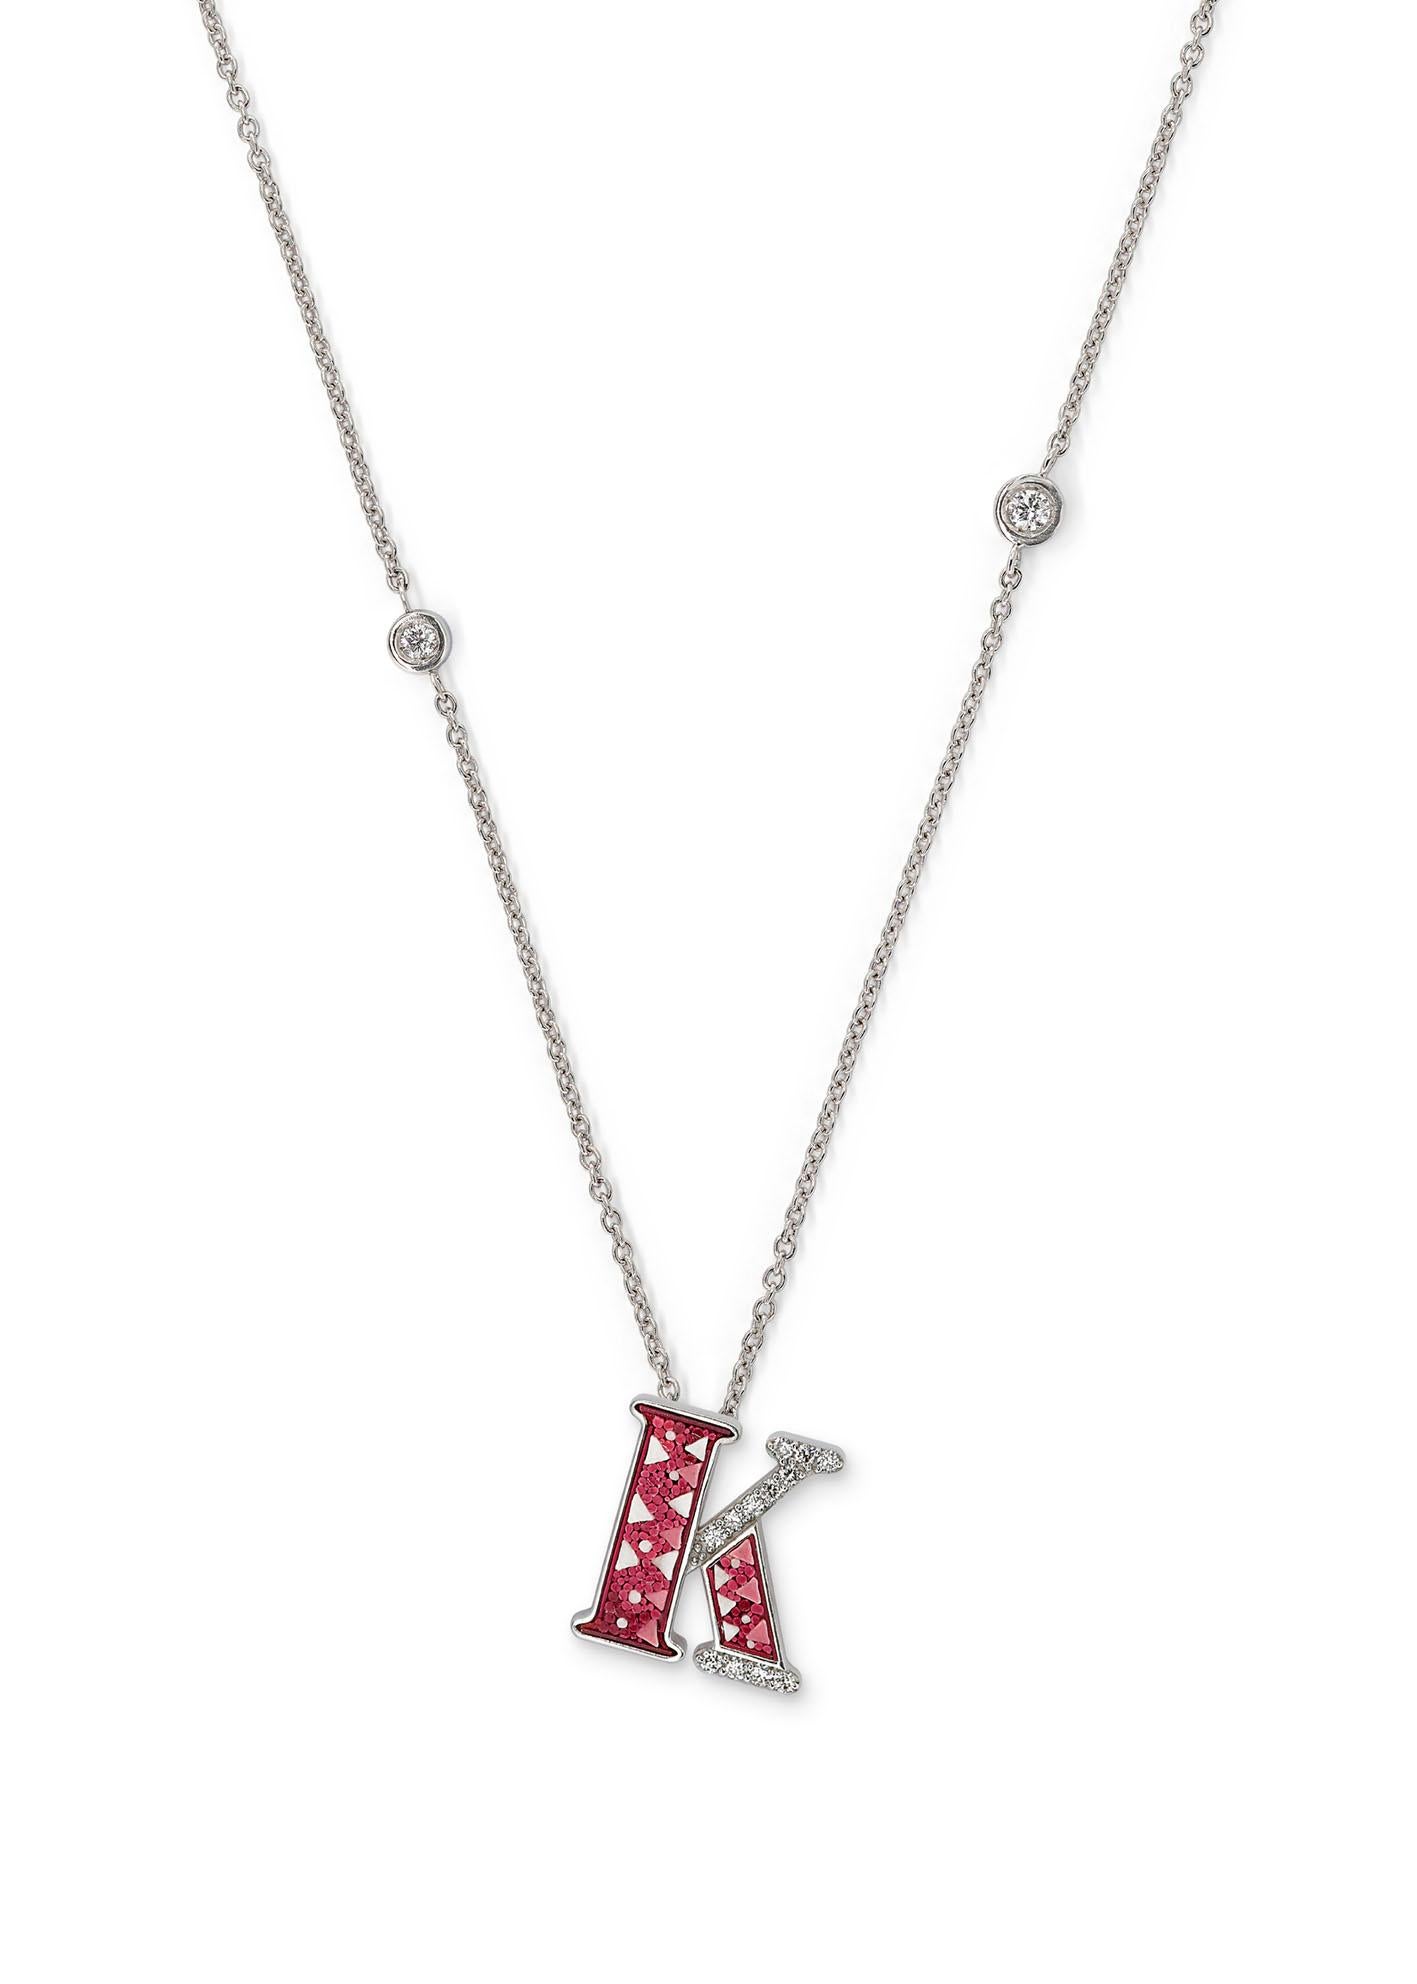 Brilliant Cut Necklace Letter K White Gold White Diamonds Hand Decorated with Micromosaic For Sale